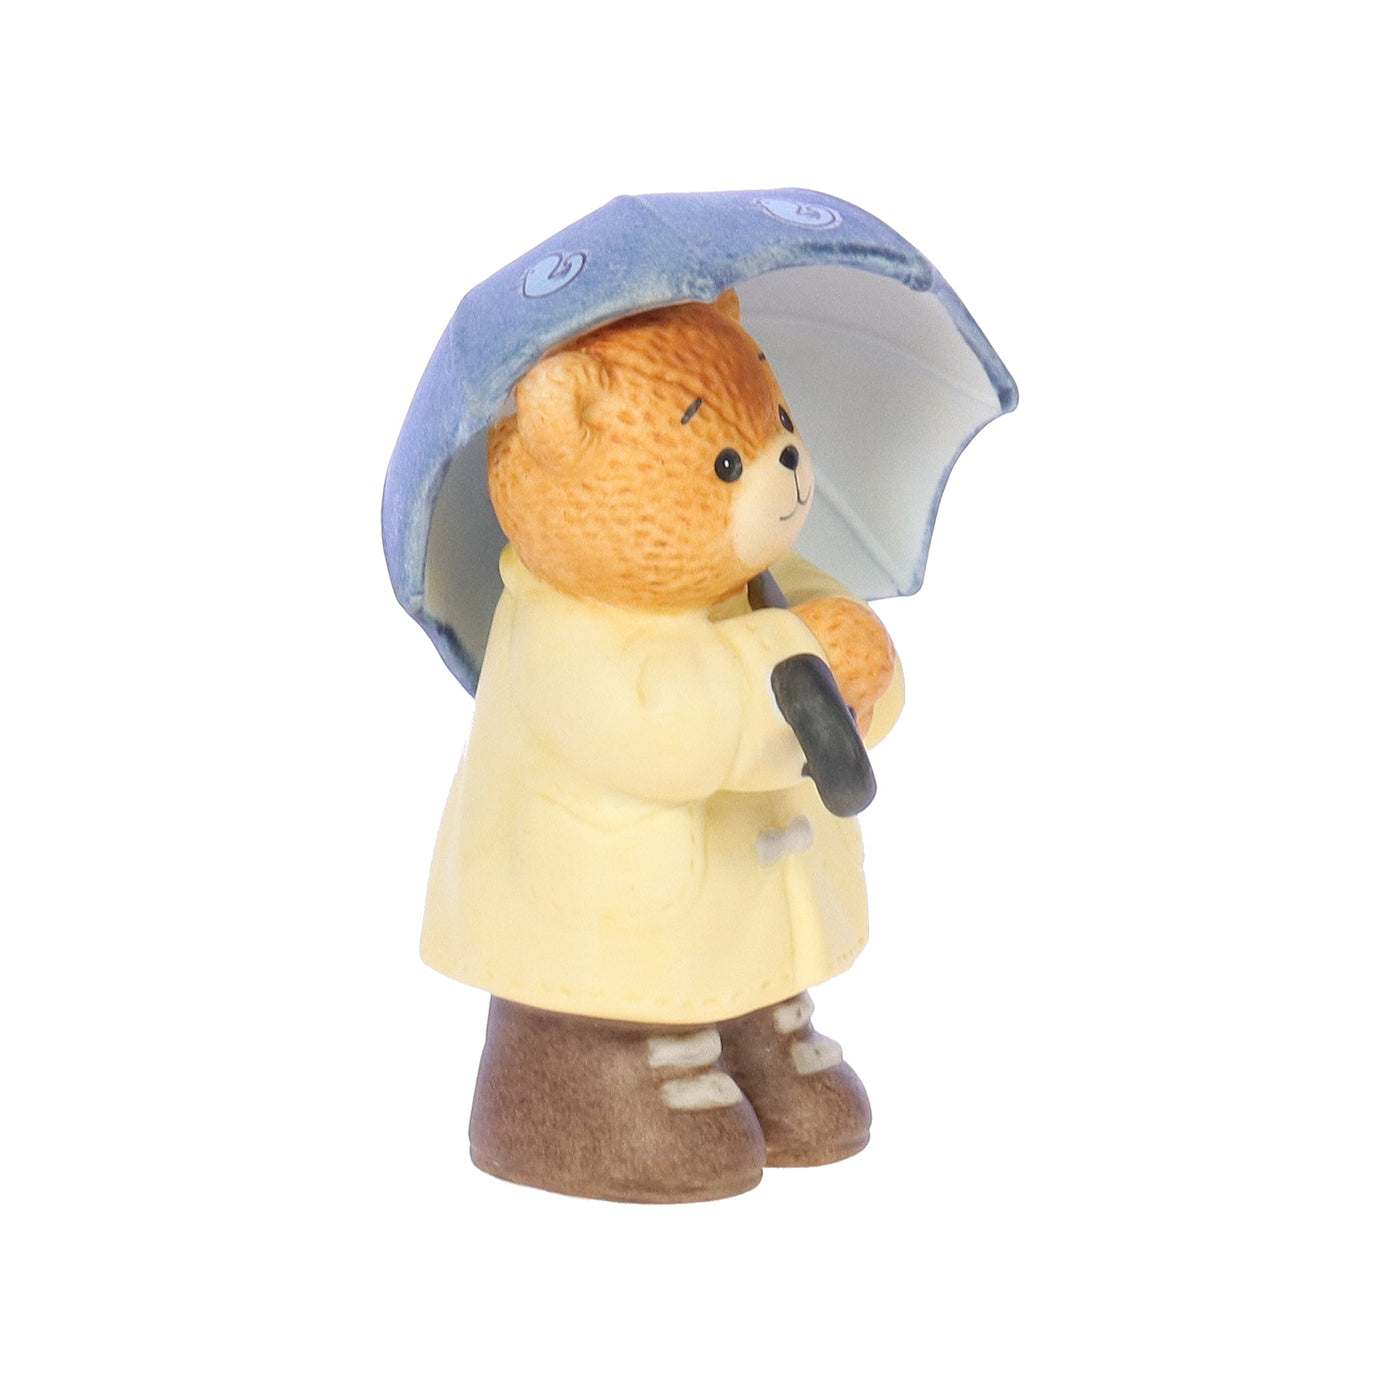 Lucy_and_Me_Bear_with_Raincoat_and_Umbrella_Spring_Figurine_1985